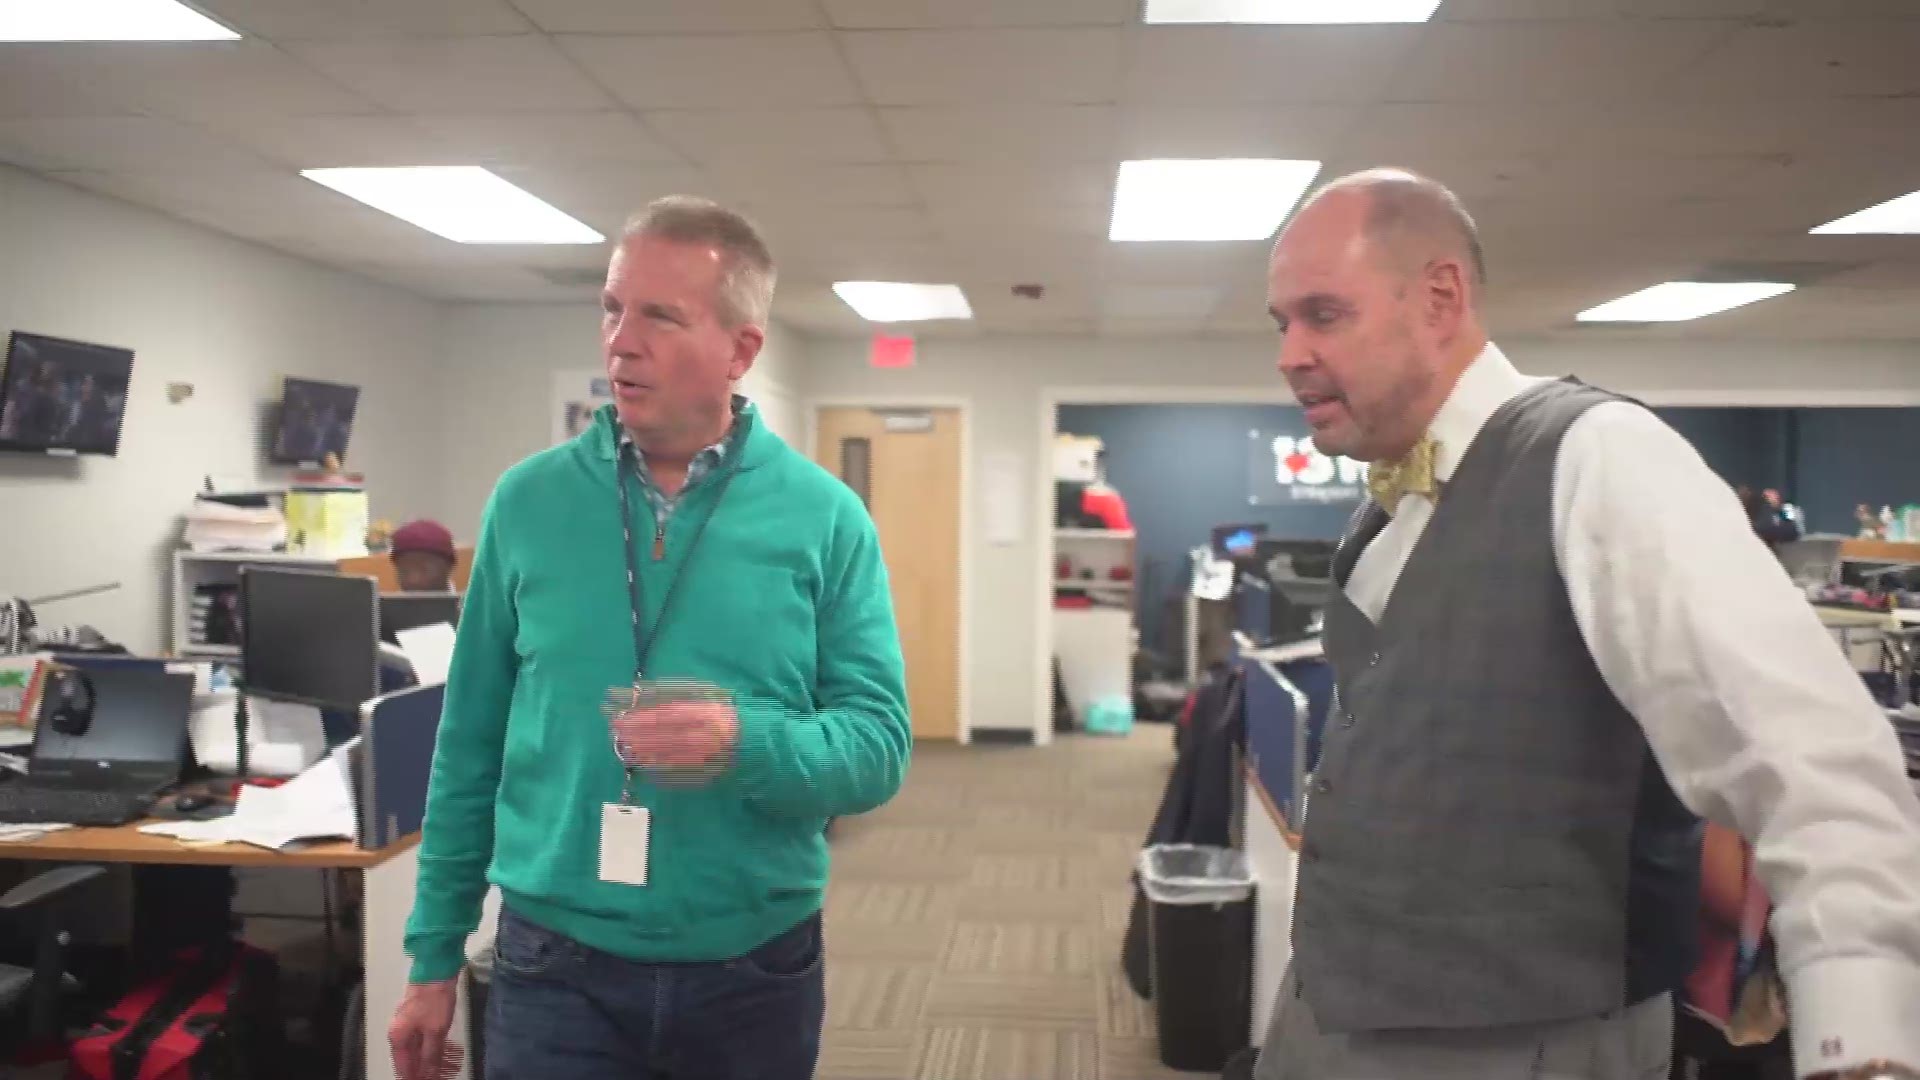 TNT’s Ernie Johnson tours his old stomping grounds at 13WMAZ in Central Georgia